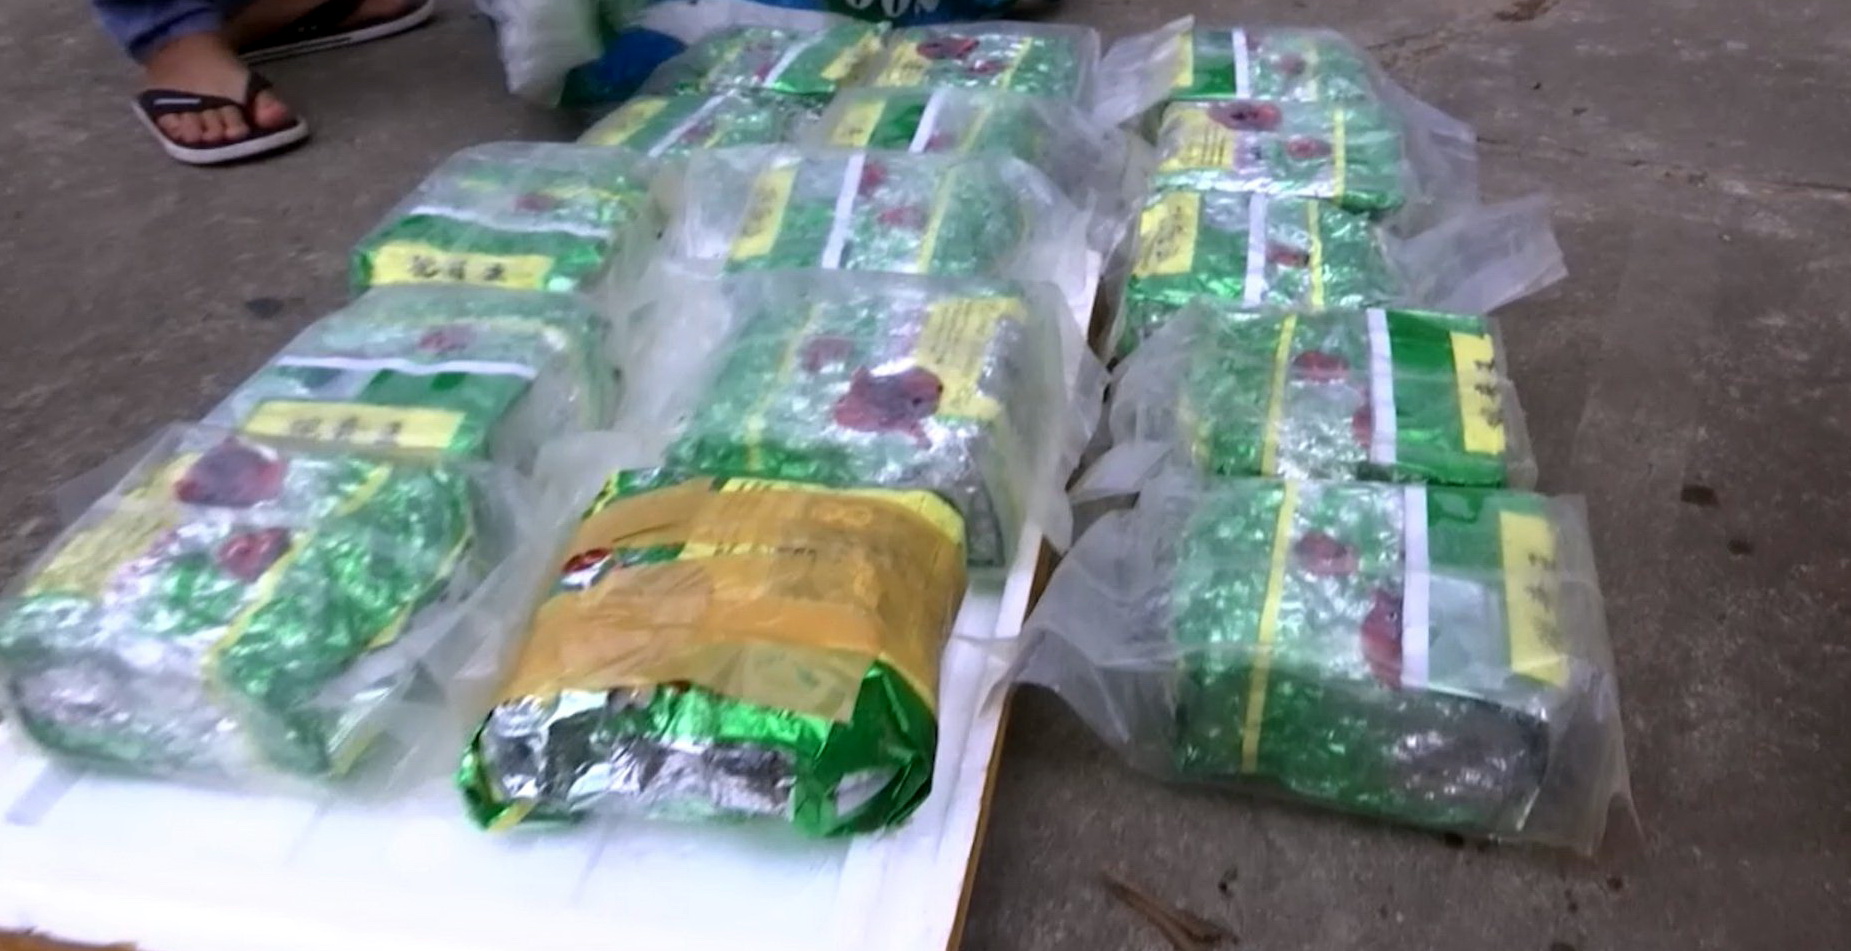 The packages containing suspected drugs are found on Con Dao Islands. Photo: Quang Anh / Tuoi Tre